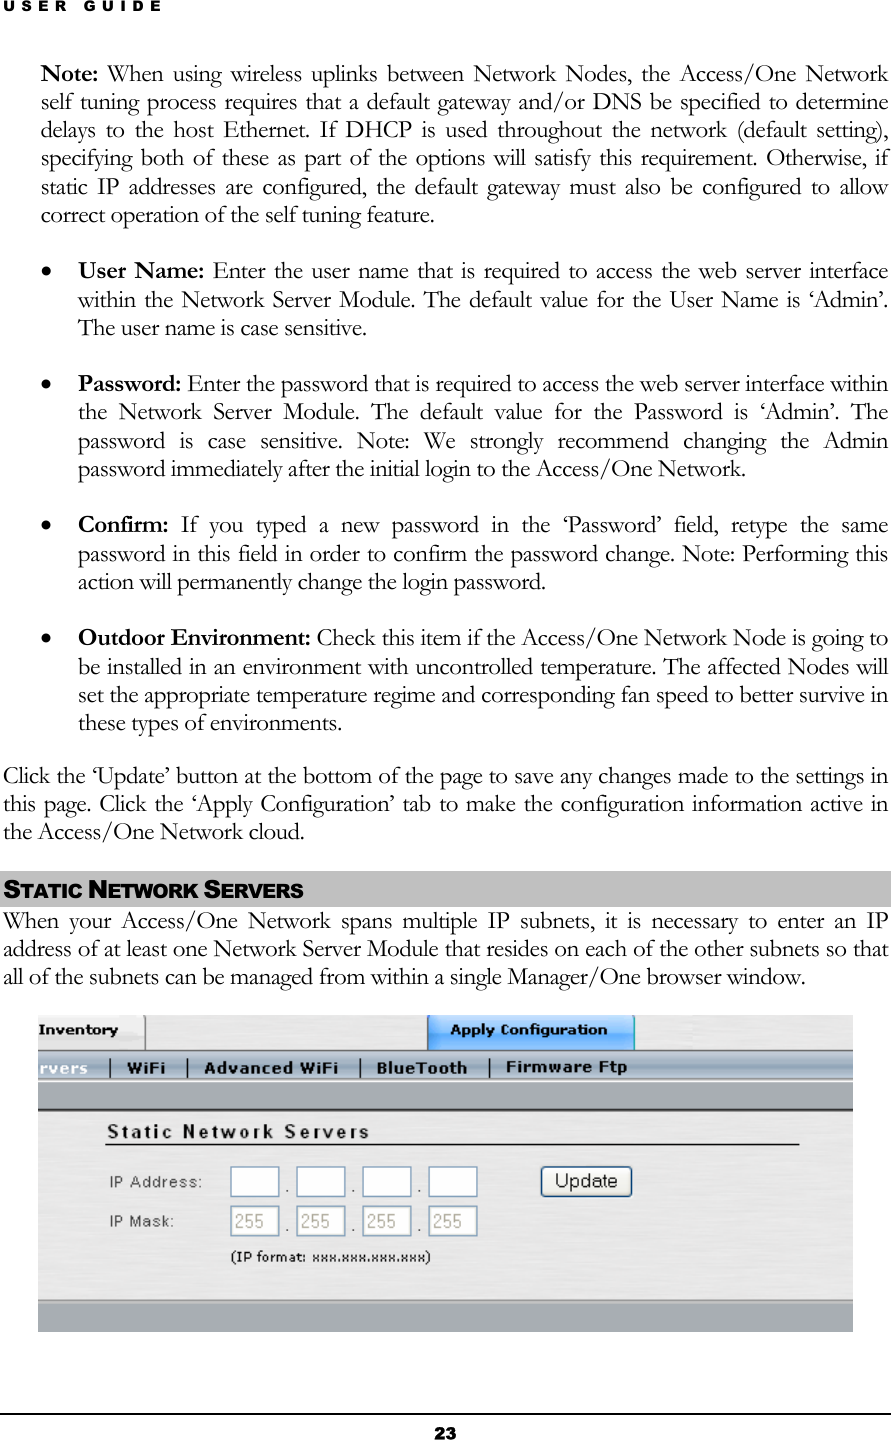 USER GUIDE Note: When using wireless uplinks between Network Nodes, the Access/One Network self tuning process requires that a default gateway and/or DNS be specified to determine delays to the host Ethernet. If DHCP is used throughout the network (default setting), specifying both of these as part of the options will satisfy this requirement. Otherwise, if static IP addresses are configured, the default gateway must also be configured to allow correct operation of the self tuning feature. • User Name: Enter the user name that is required to access the web server interface within the Network Server Module. The default value for the User Name is ‘Admin’. The user name is case sensitive. • Password: Enter the password that is required to access the web server interface within the Network Server Module. The default value for the Password is ‘Admin’. The password is case sensitive. Note: We strongly recommend changing the Admin password immediately after the initial login to the Access/One Network. • Confirm: If you typed a new password in the ‘Password’ field, retype the same password in this field in order to confirm the password change. Note: Performing this action will permanently change the login password. • Outdoor Environment: Check this item if the Access/One Network Node is going to be installed in an environment with uncontrolled temperature. The affected Nodes will set the appropriate temperature regime and corresponding fan speed to better survive in these types of environments. Click the ‘Update’ button at the bottom of the page to save any changes made to the settings in this page. Click the ‘Apply Configuration’ tab to make the configuration information active in the Access/One Network cloud. STATIC NETWORK SERVERS  When your Access/One Network spans multiple IP subnets, it is necessary to enter an IP address of at least one Network Server Module that resides on each of the other subnets so that all of the subnets can be managed from within a single Manager/One browser window.  23 